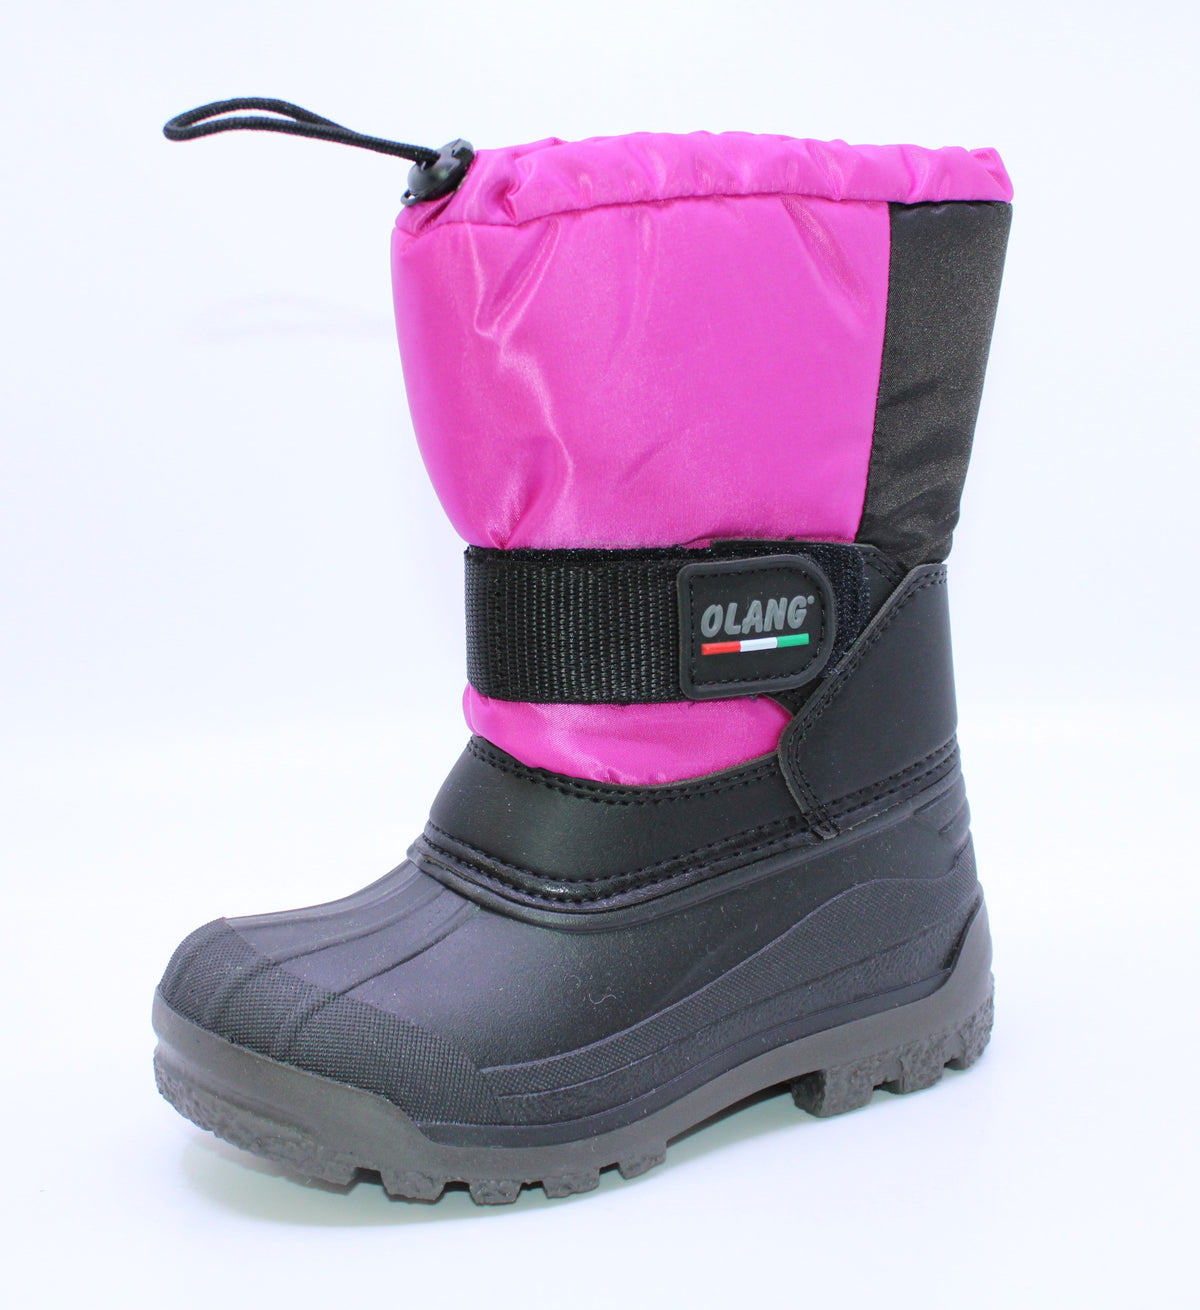 Bottes d'hiver Olang Canada 2.0 F Fille